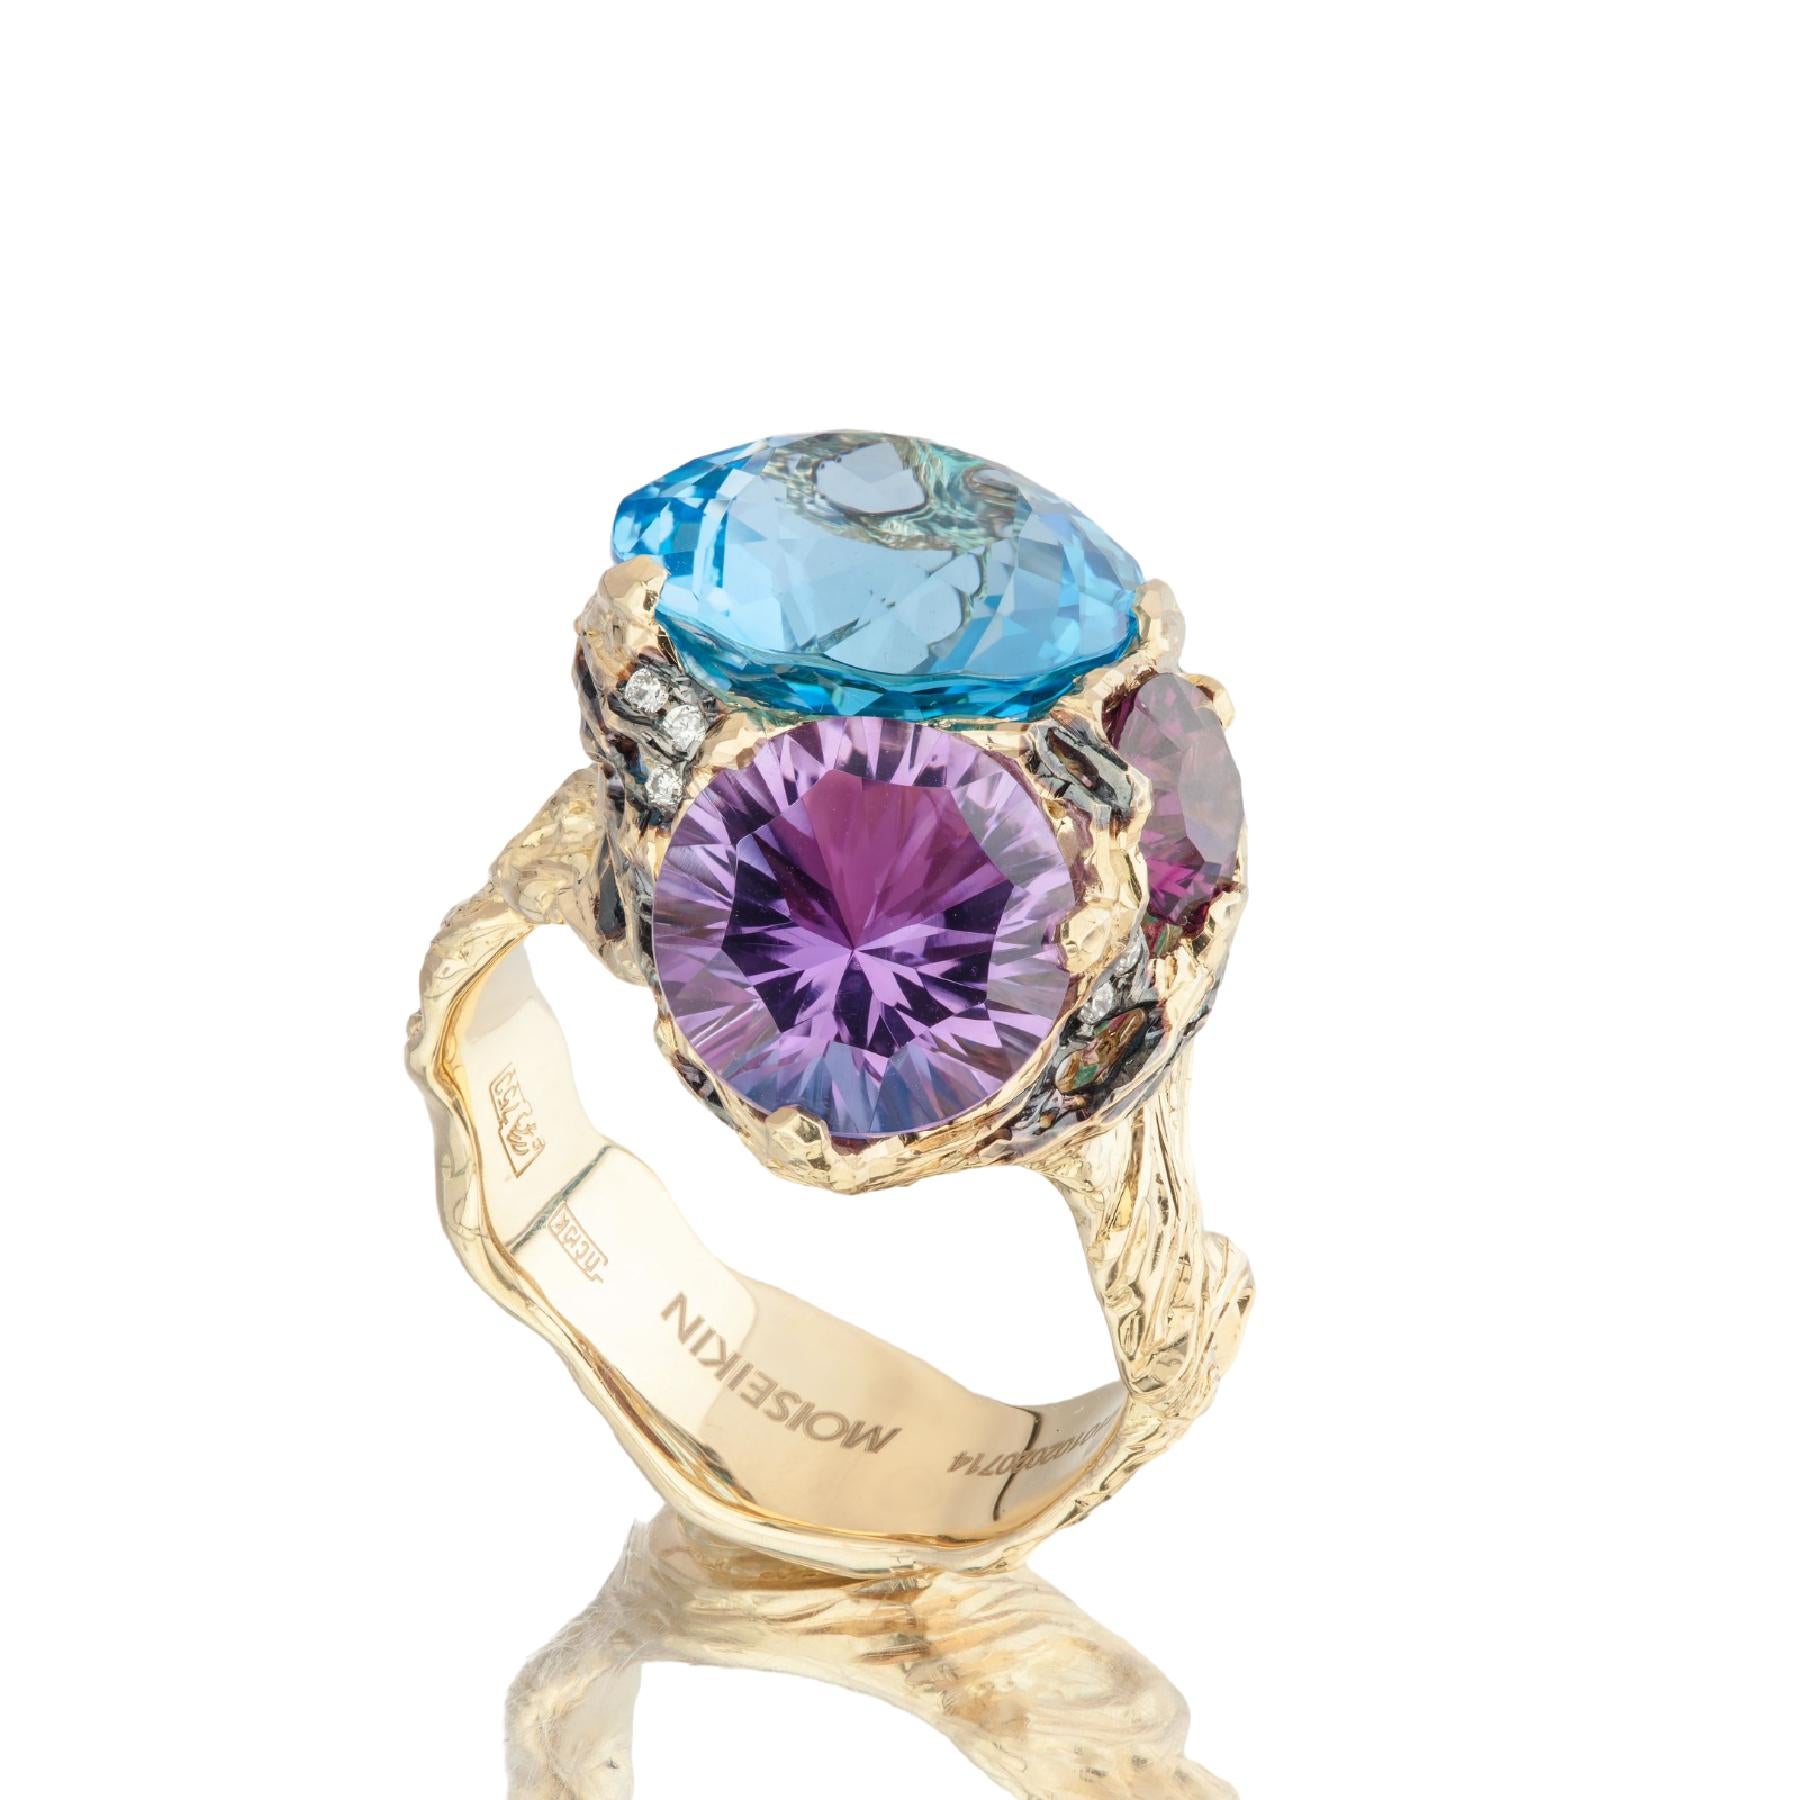 Inspired by Impressionism and Vincent Van Gogh's artistic paintings, MOISEIKIN created a starry night motif handmade ring with gold, diamonds, and multi-facet semi-precious stones such as Amethyst, Topaz, etc Rhodonite. The colourful facetted gems